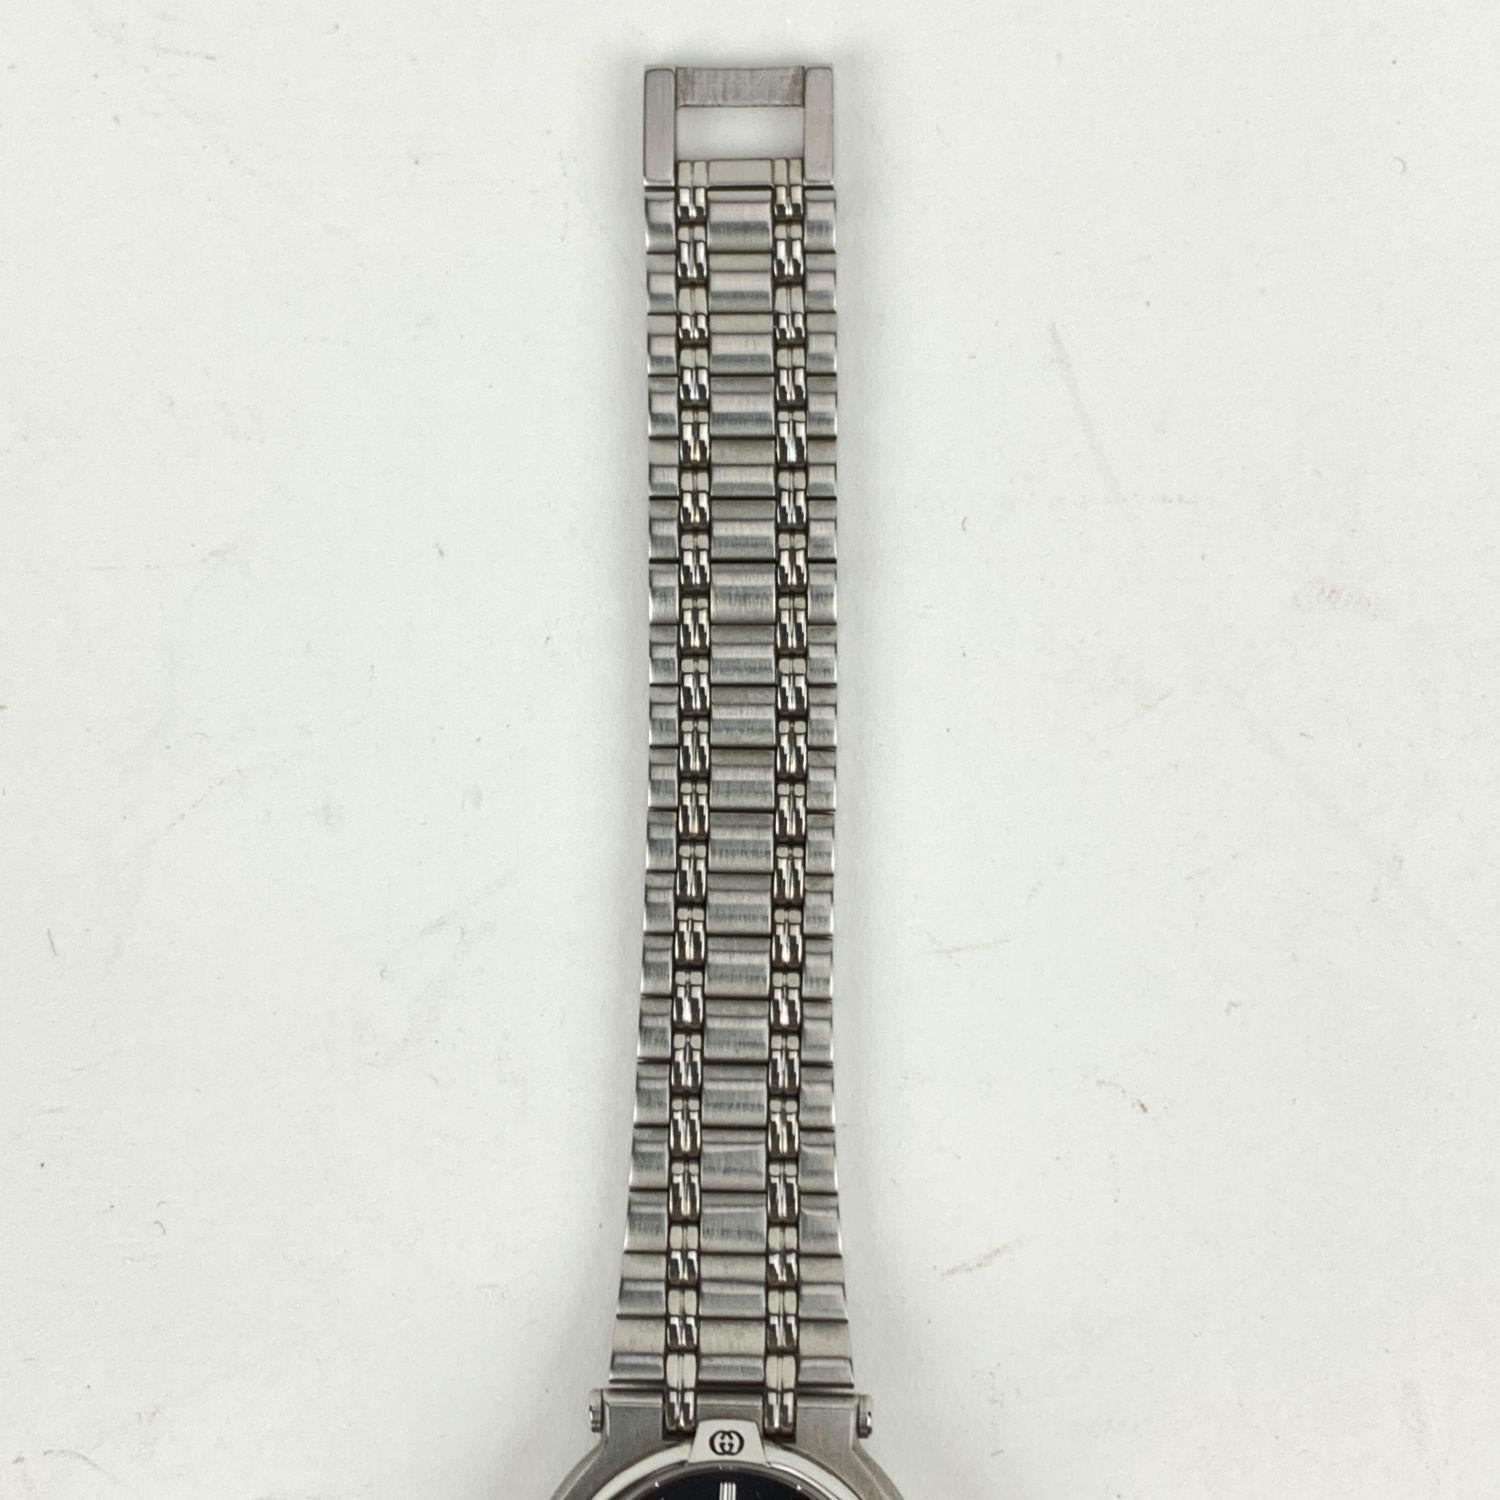 Gucci Vintage Stainless Steel Mod 9100 L Wrist Watch Black Dial 1